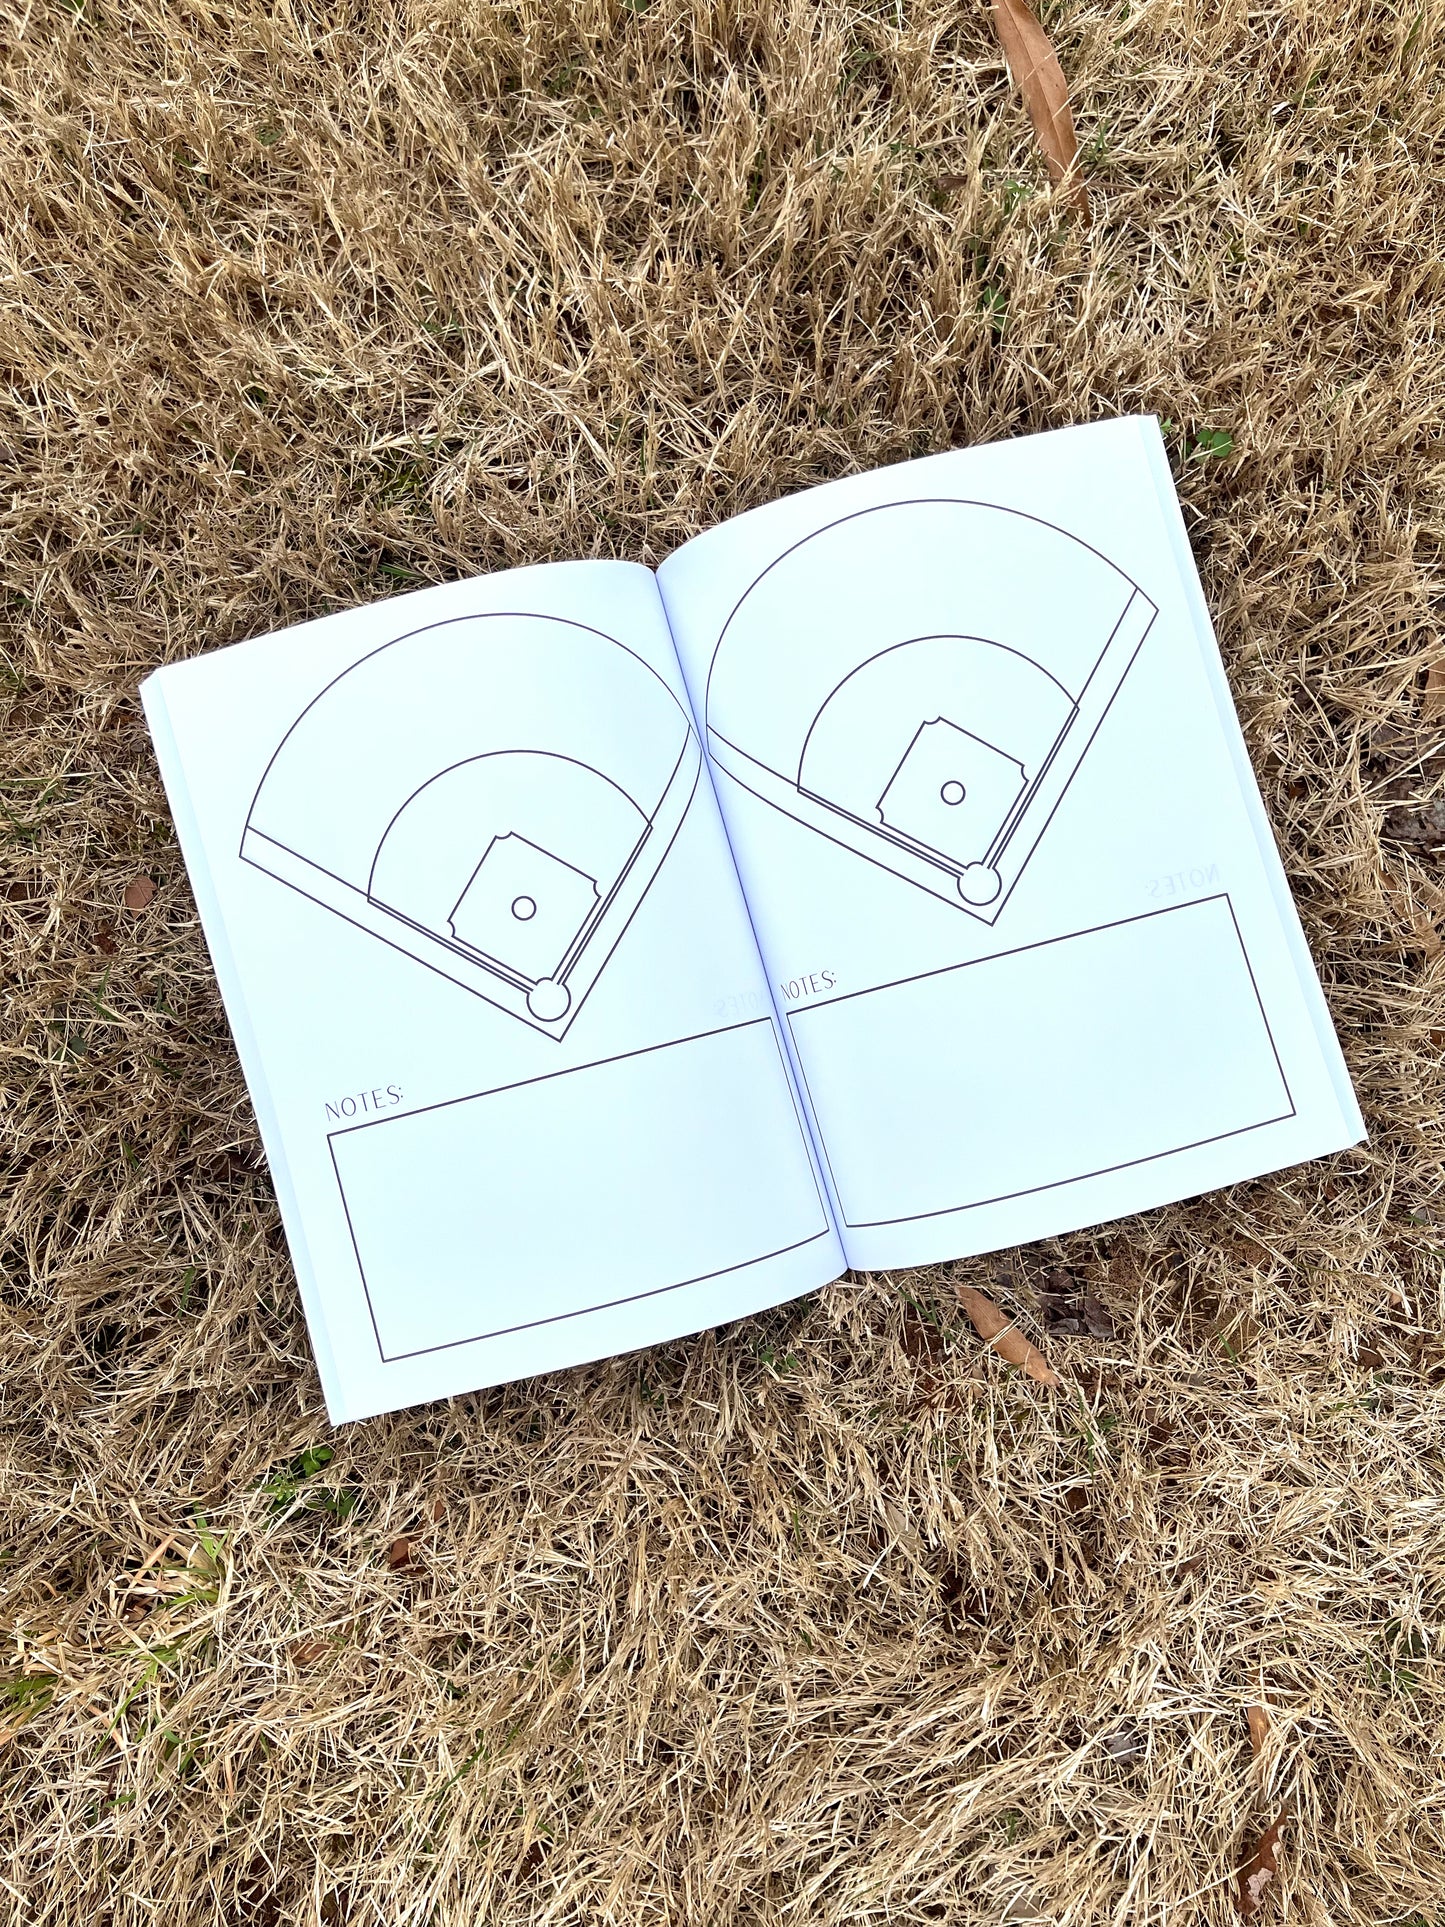 Baseball Coach Notebook: 125 Page Playbook with Baseball Field Diagrams and Note-Taking Sections